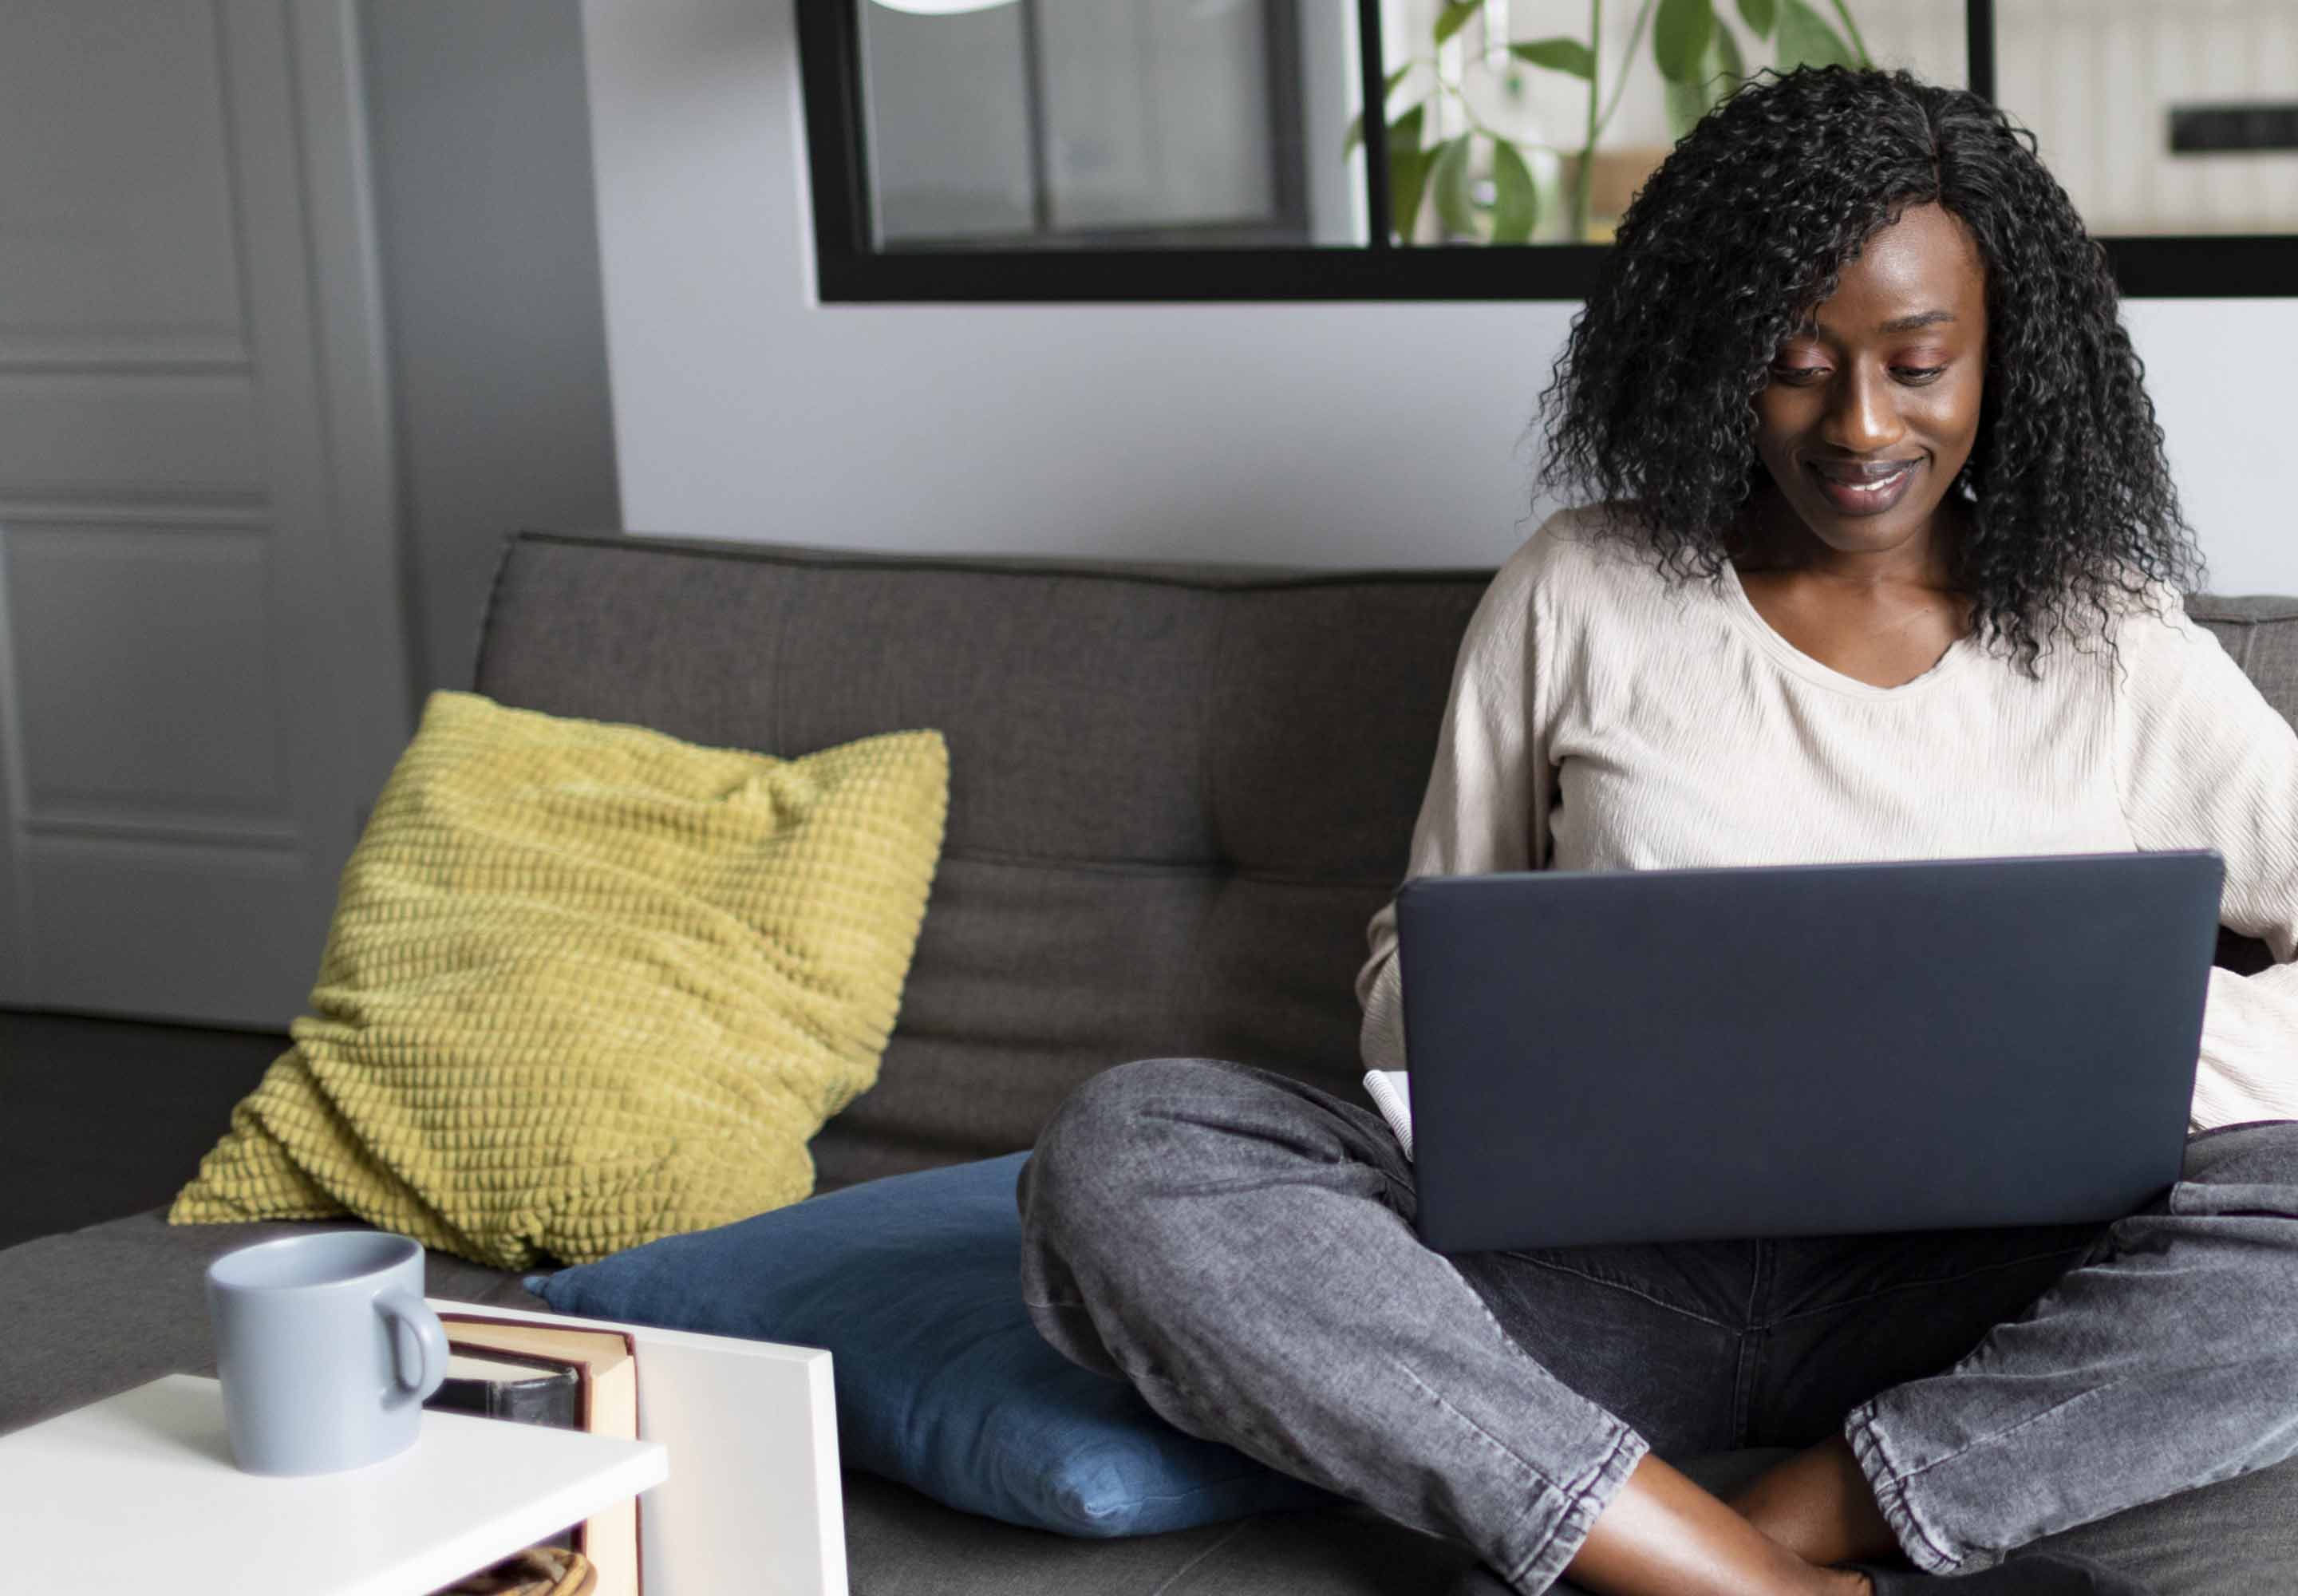 Smiling young black woman sitting legs crossed on couch with laptop on lap